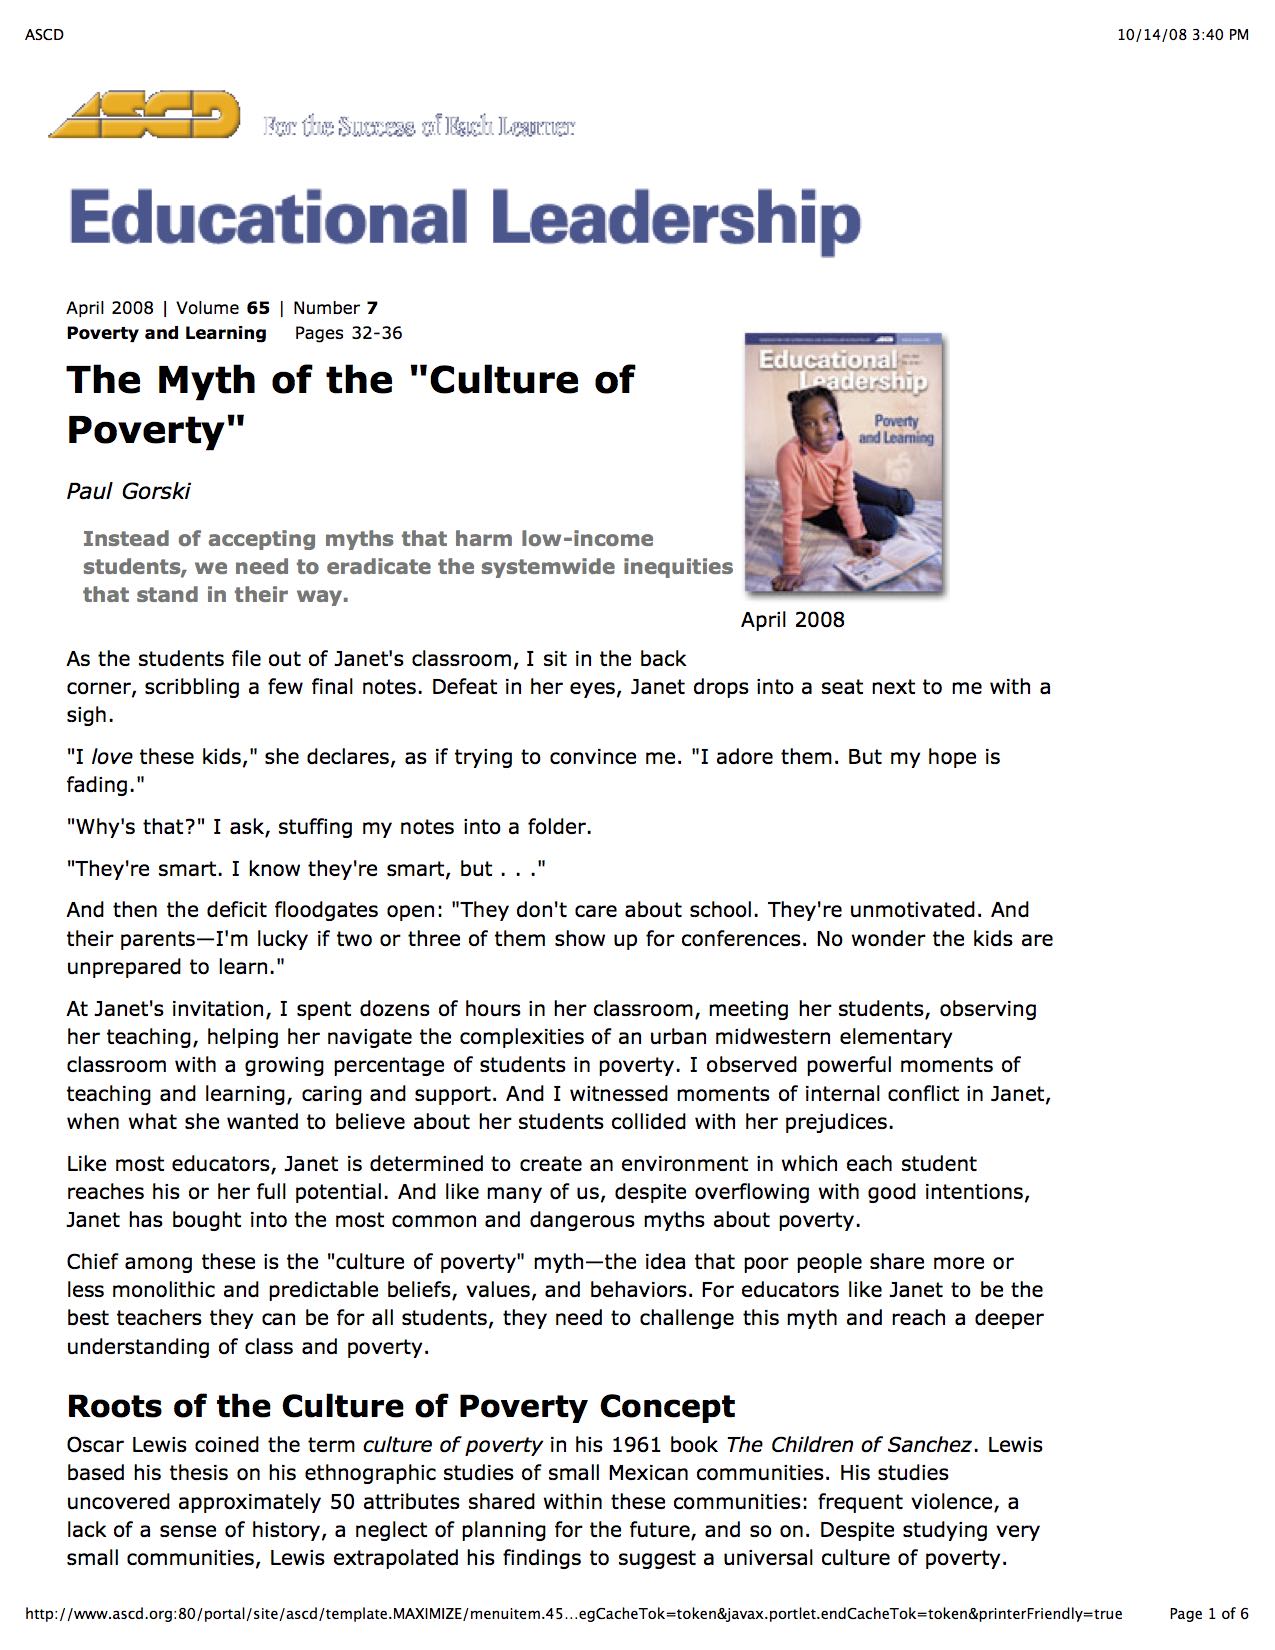 what is the culture of poverty thesis